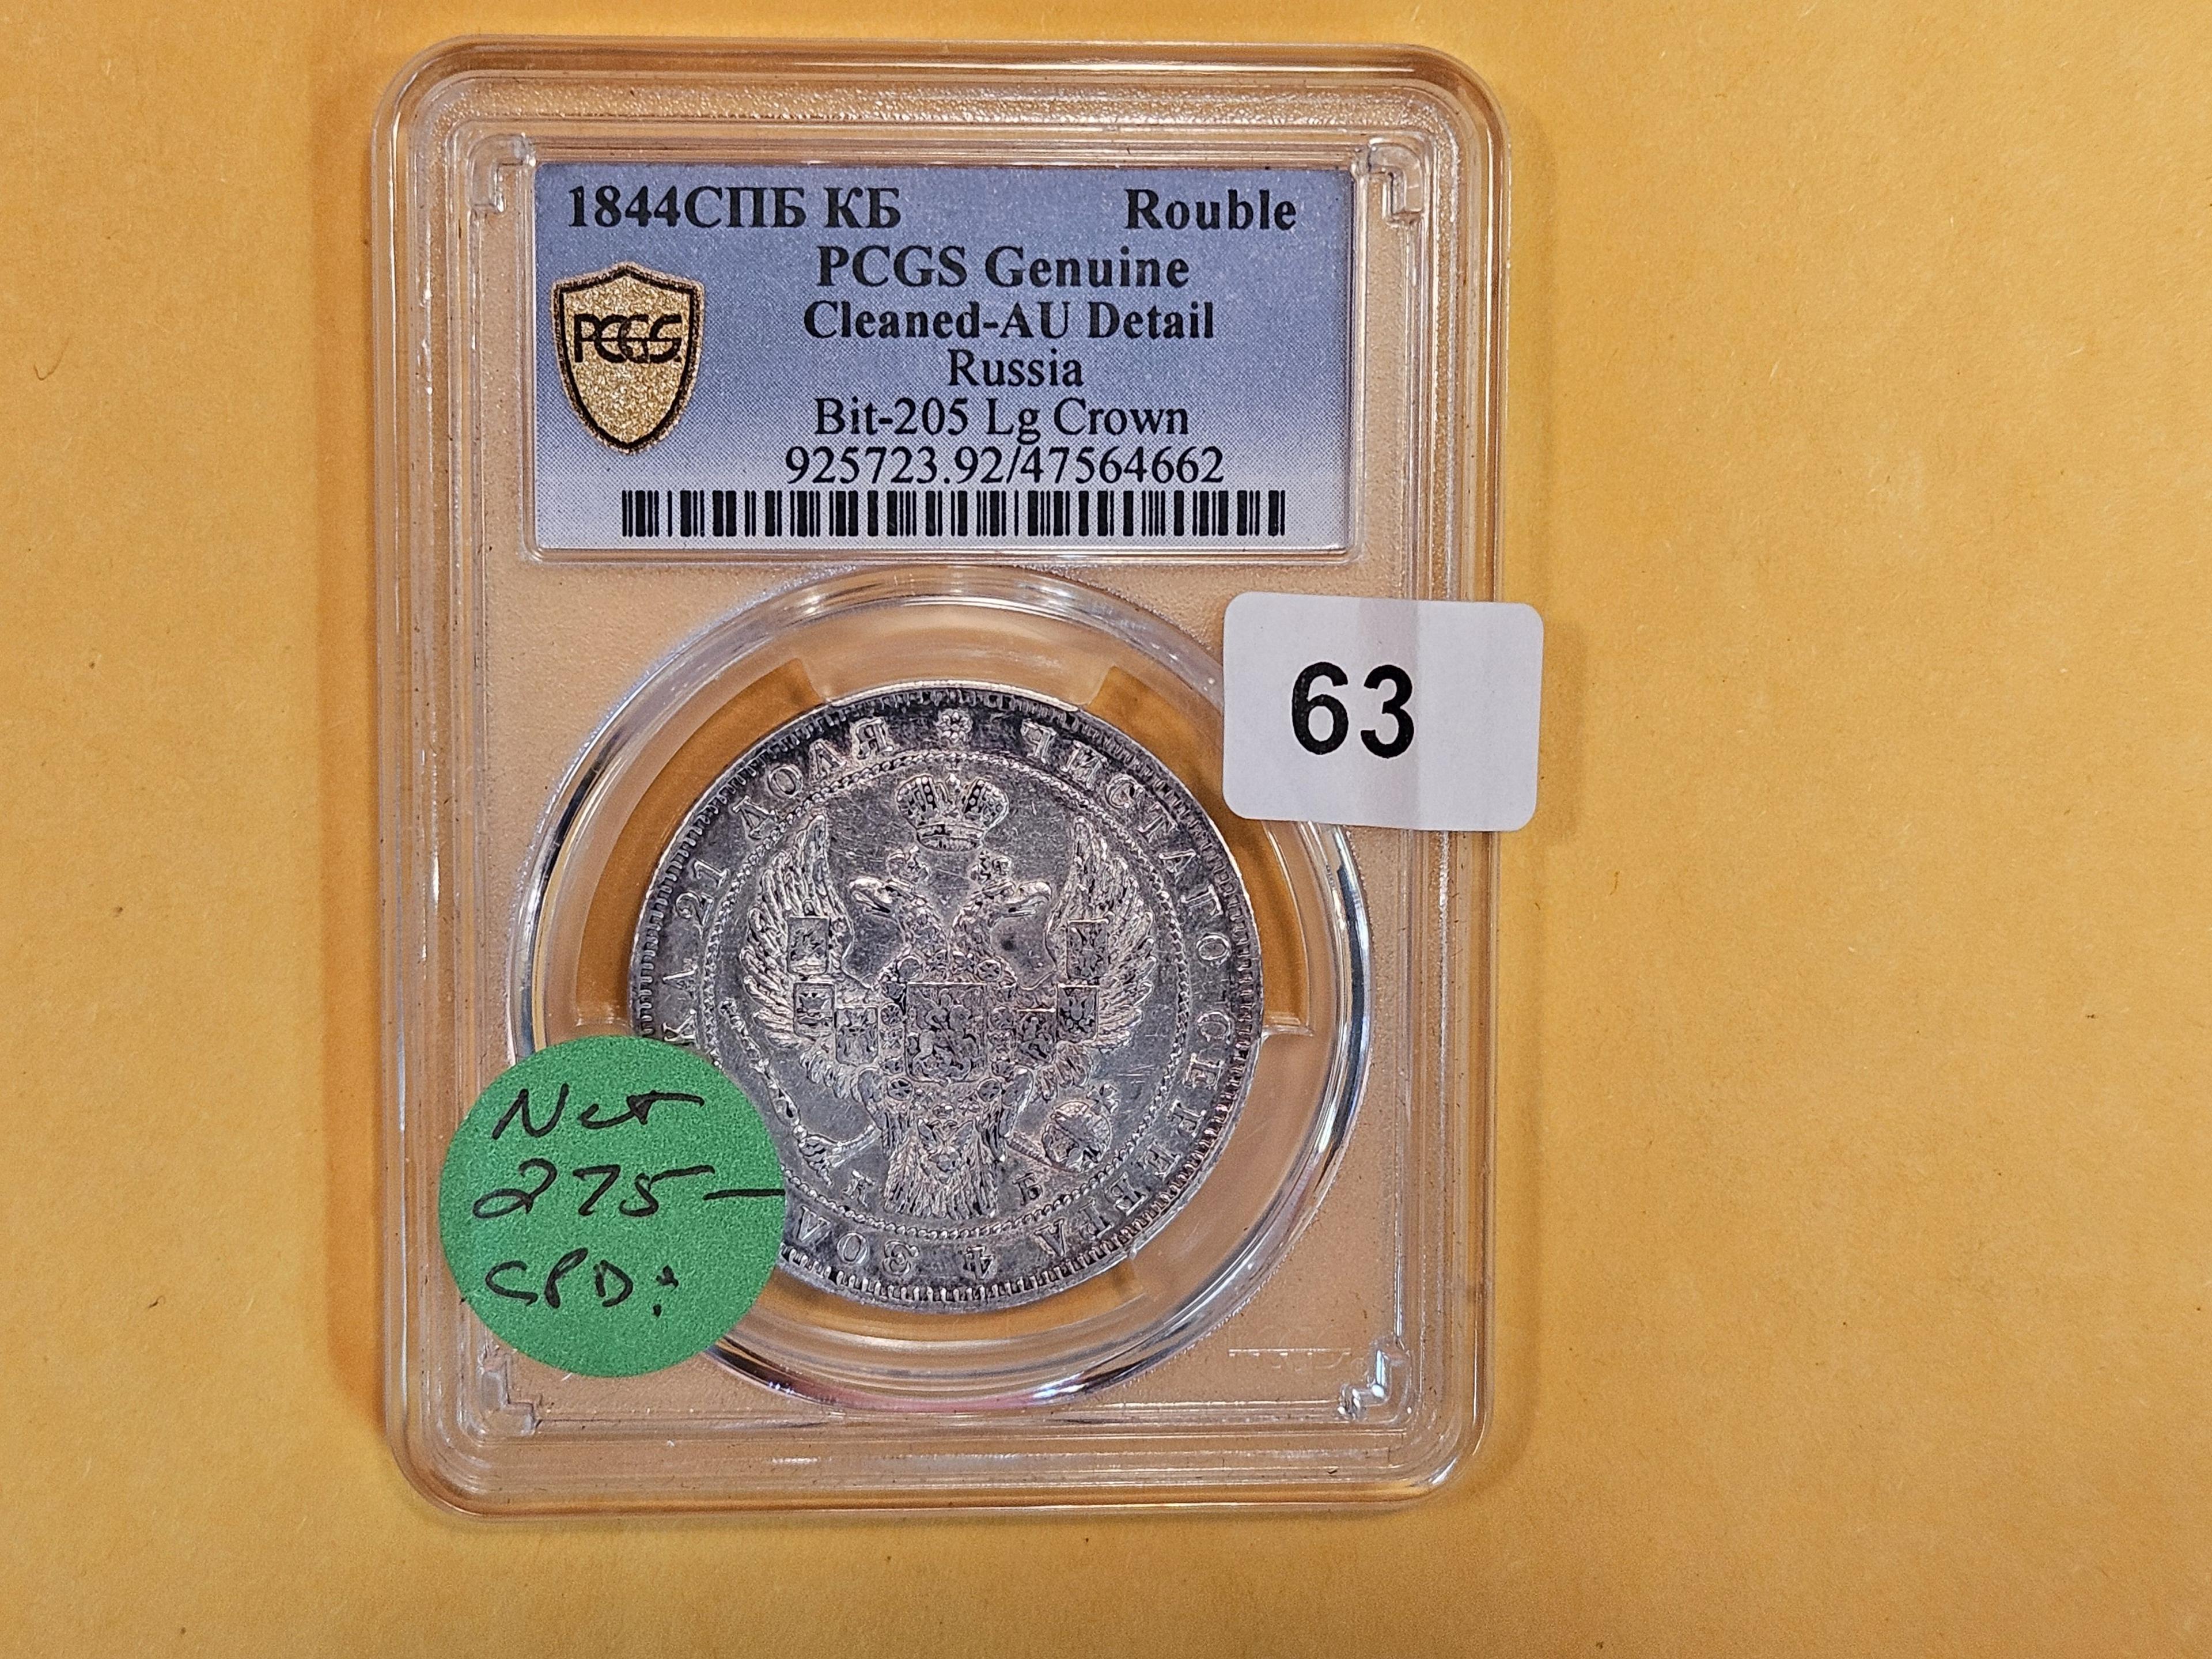 PCGS 1844 Russia Rouble in Brilliant About Uncirculated - details